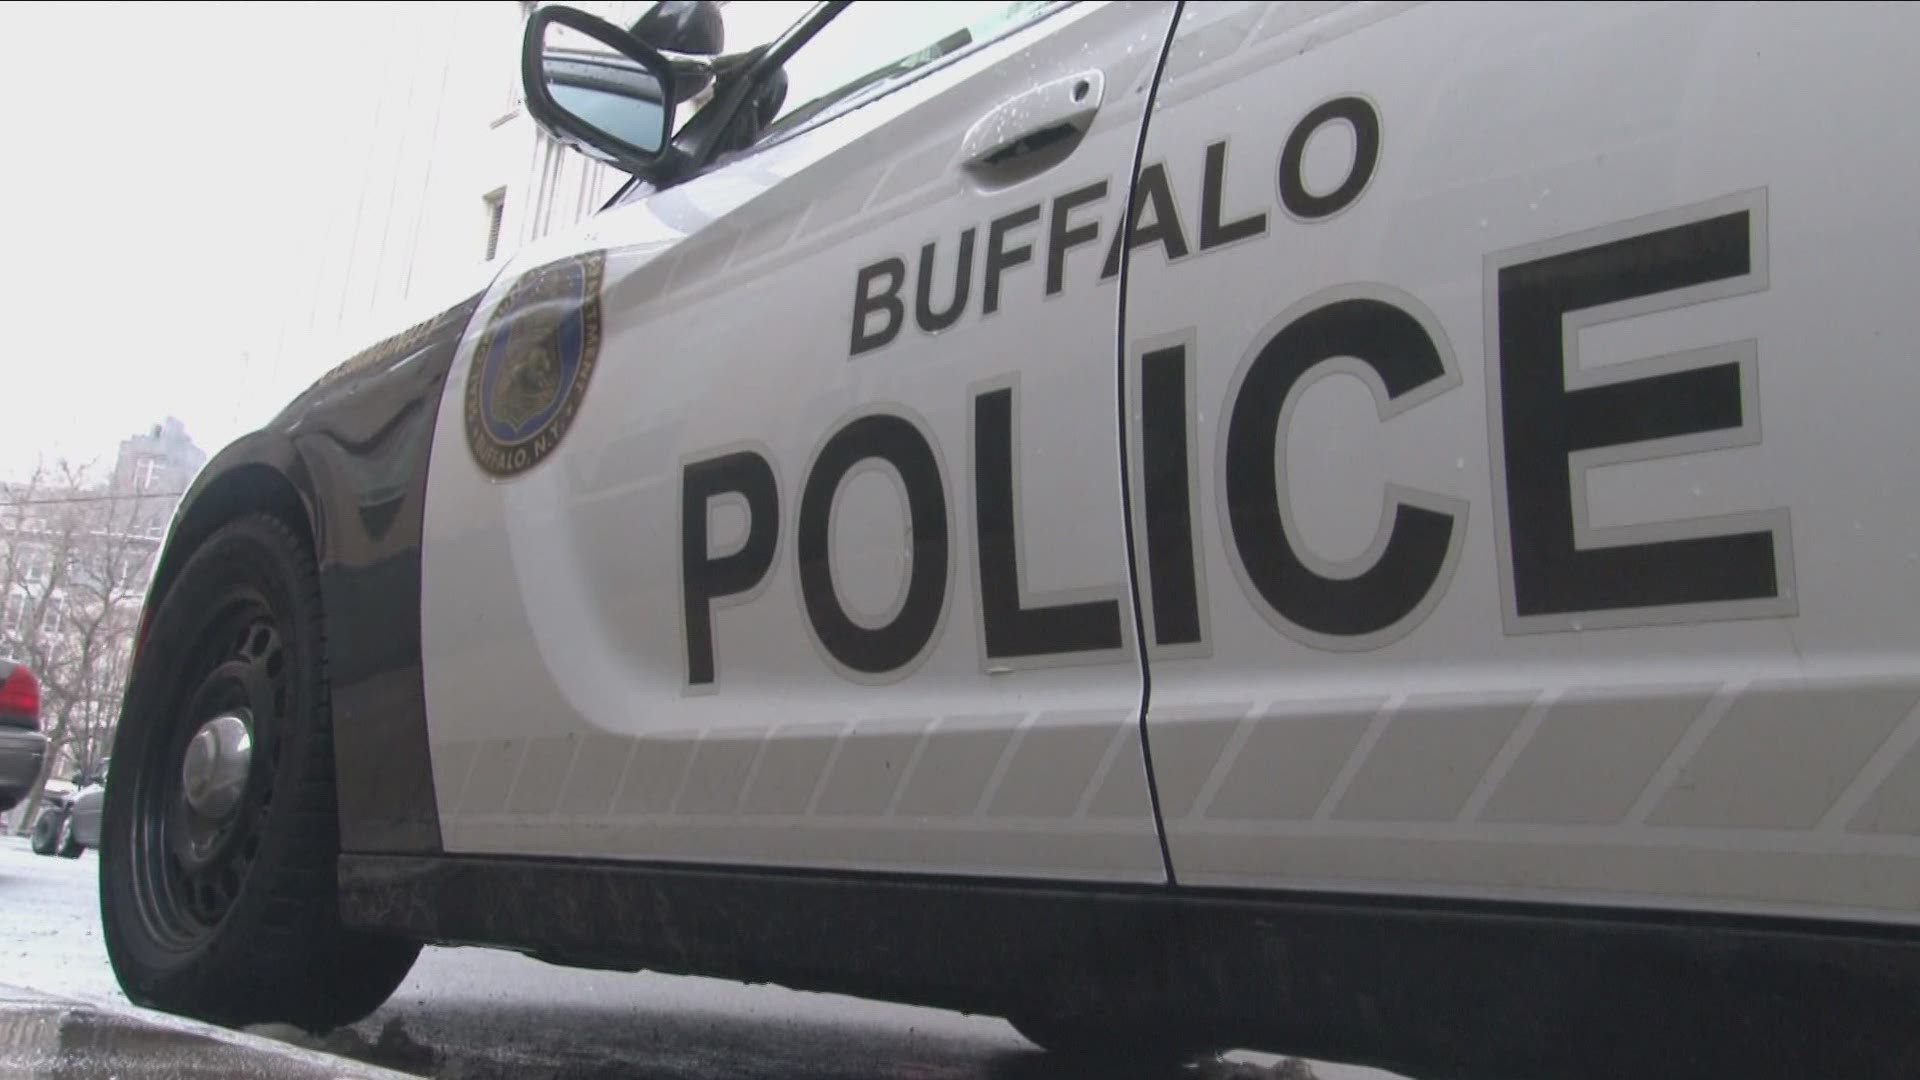 Several shootings in the City of Buffalo are under investigation after a violent weekend in some parts of the city.